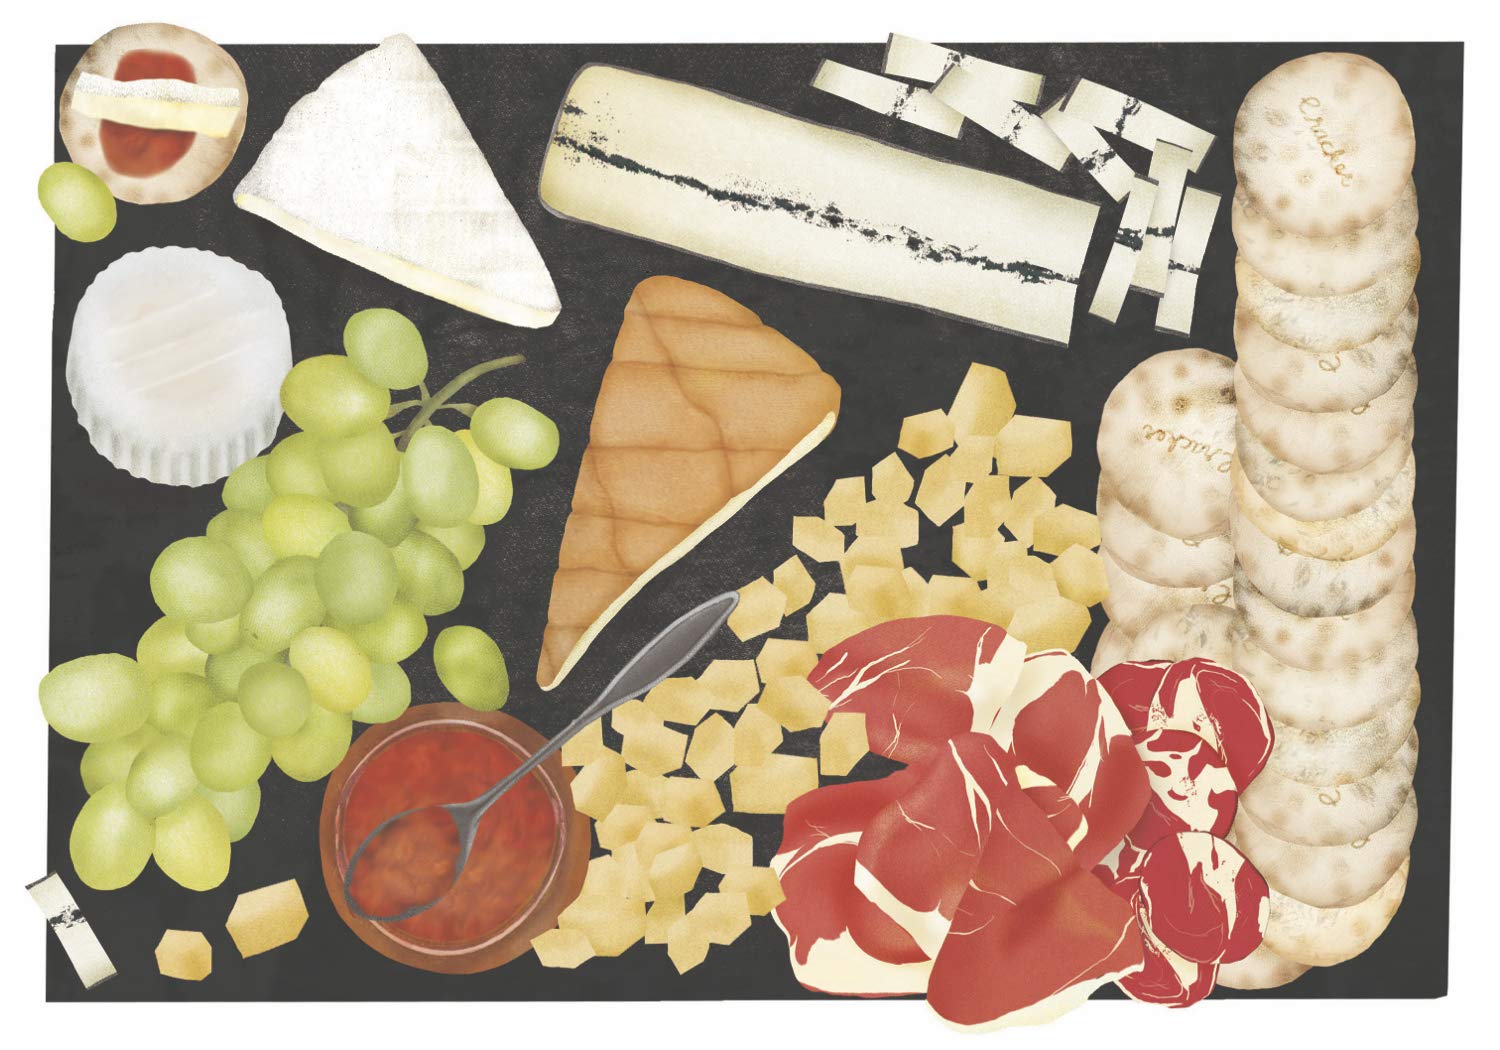 The New Rules of Cheese: A Freewheeling & Informative Guide (Anne Saxelby)